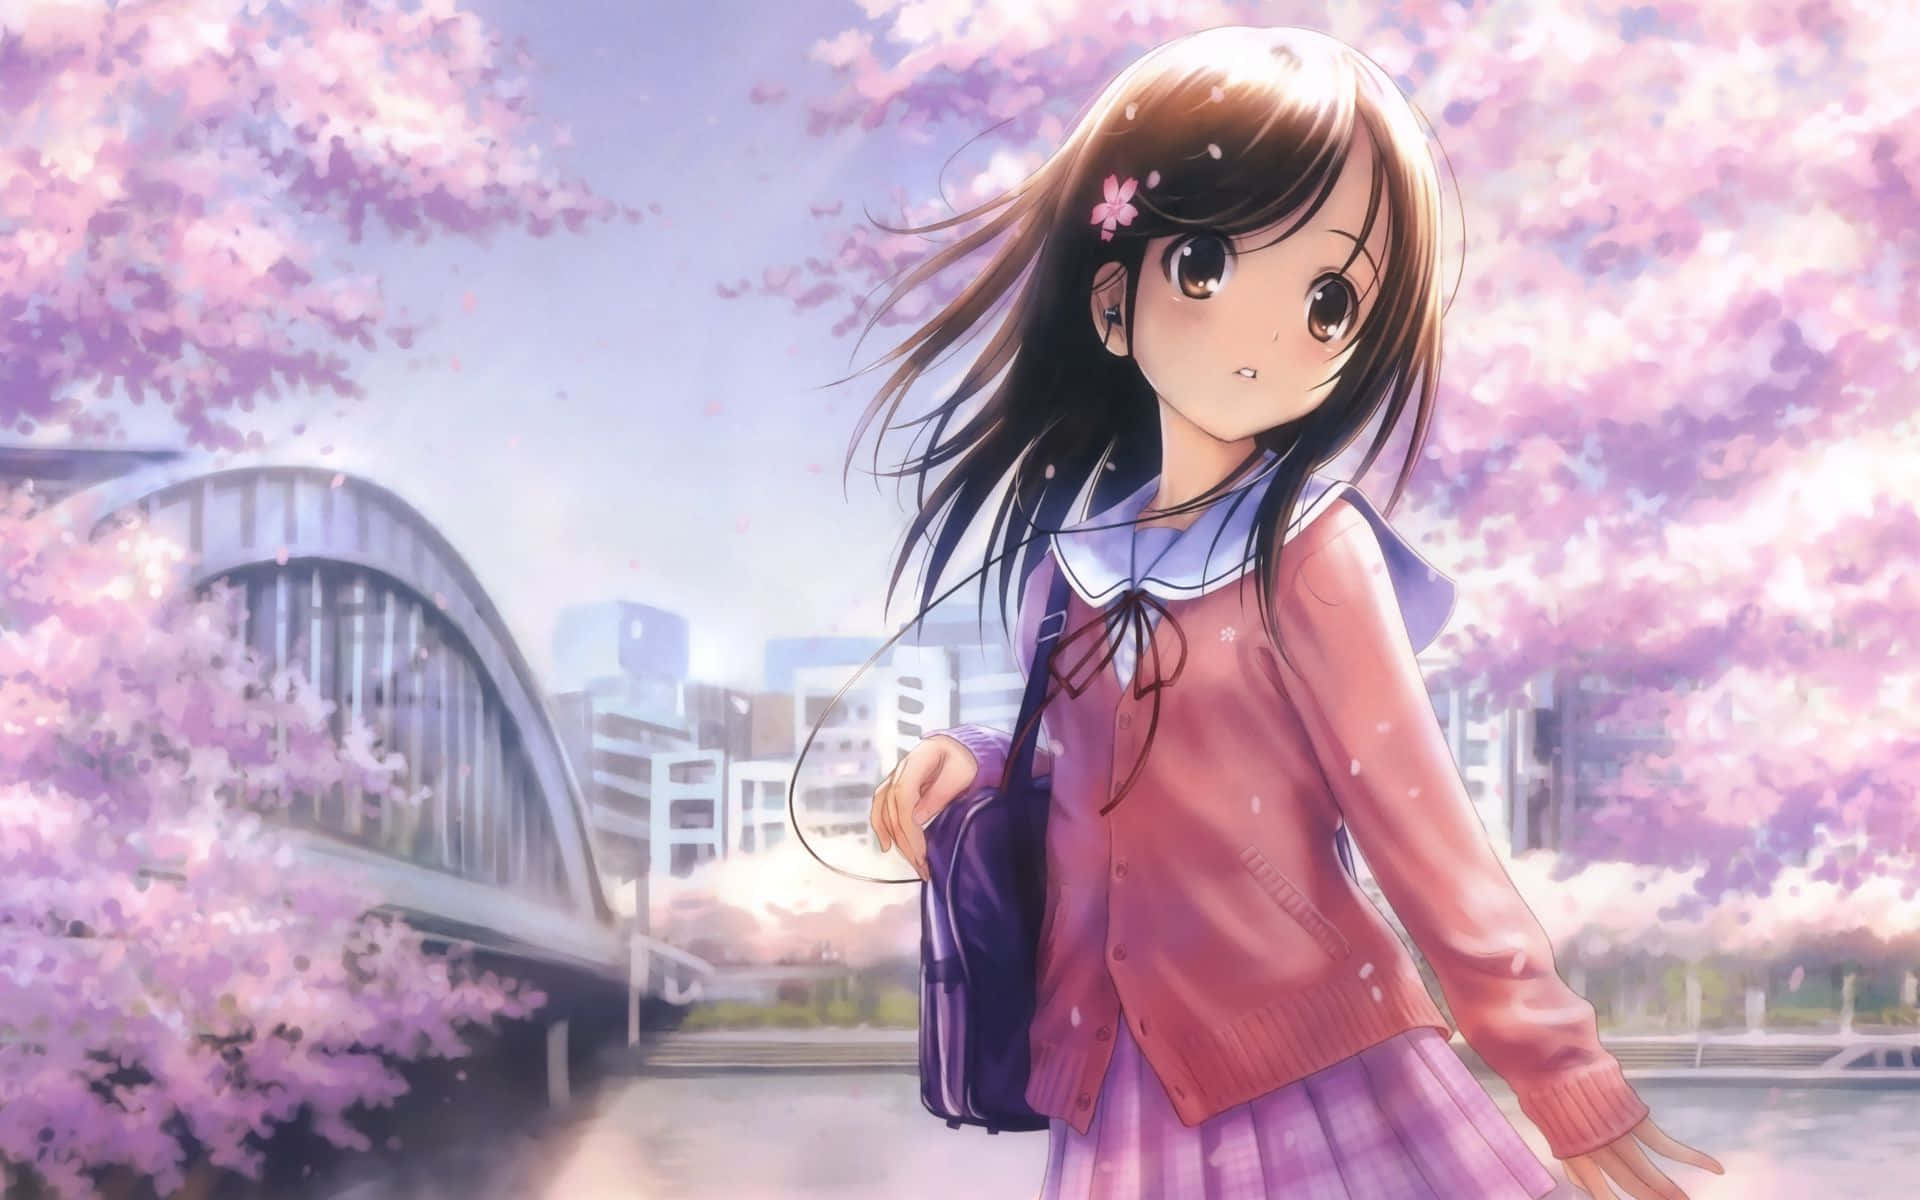 Anime Girl In Pink Dress Standing In Front Of Cherry Blossoms